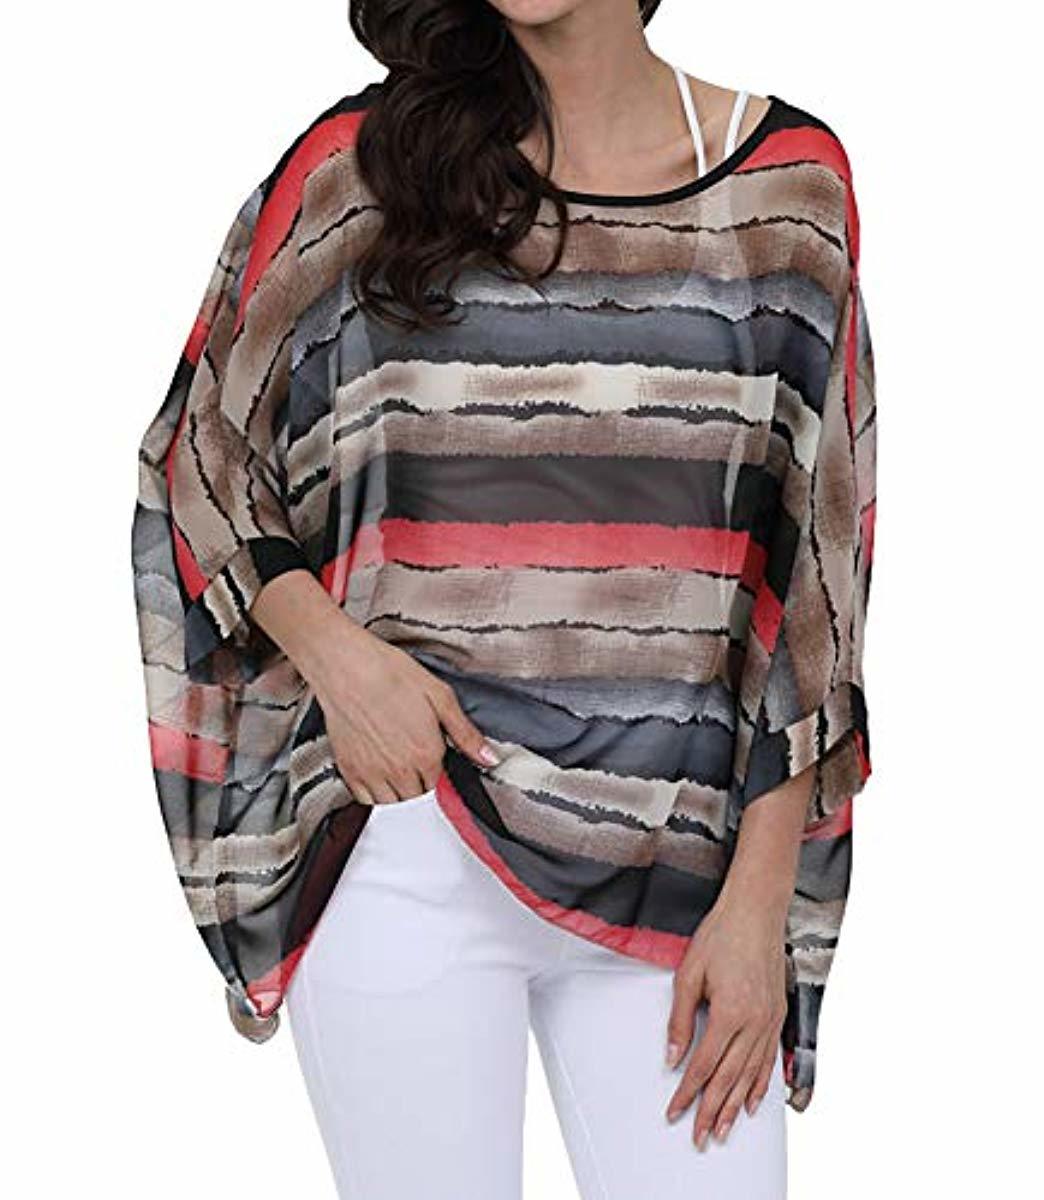 Women Chiffon Blouse Floral Batwing Sleeve Beach Cover Up Loose Tunic Shirt Tops